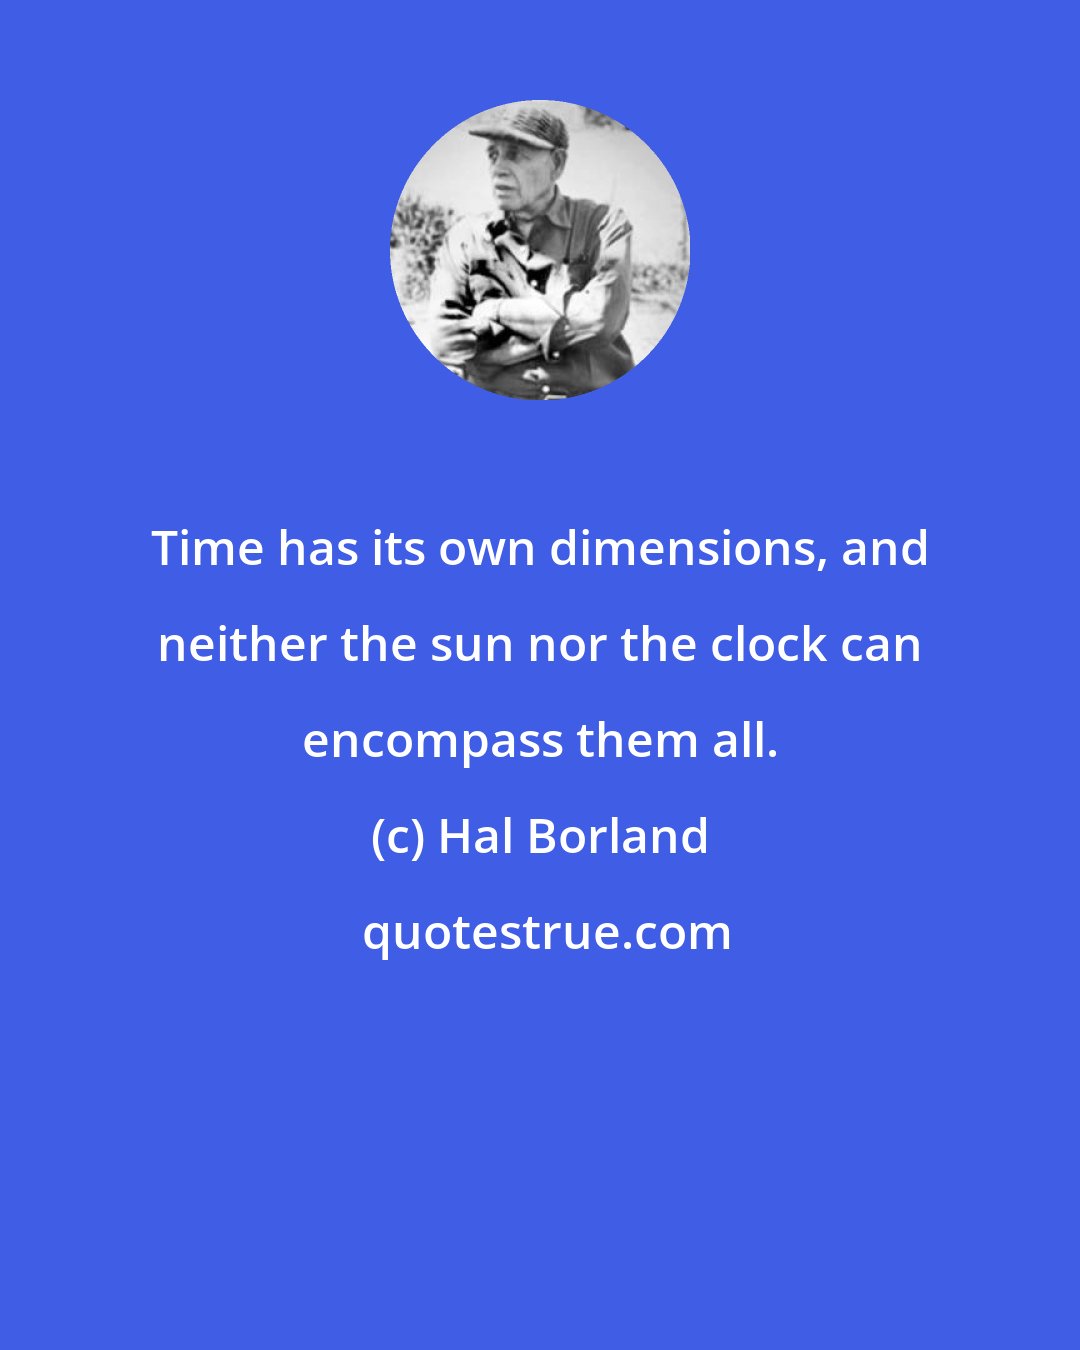 Hal Borland: Time has its own dimensions, and neither the sun nor the clock can encompass them all.